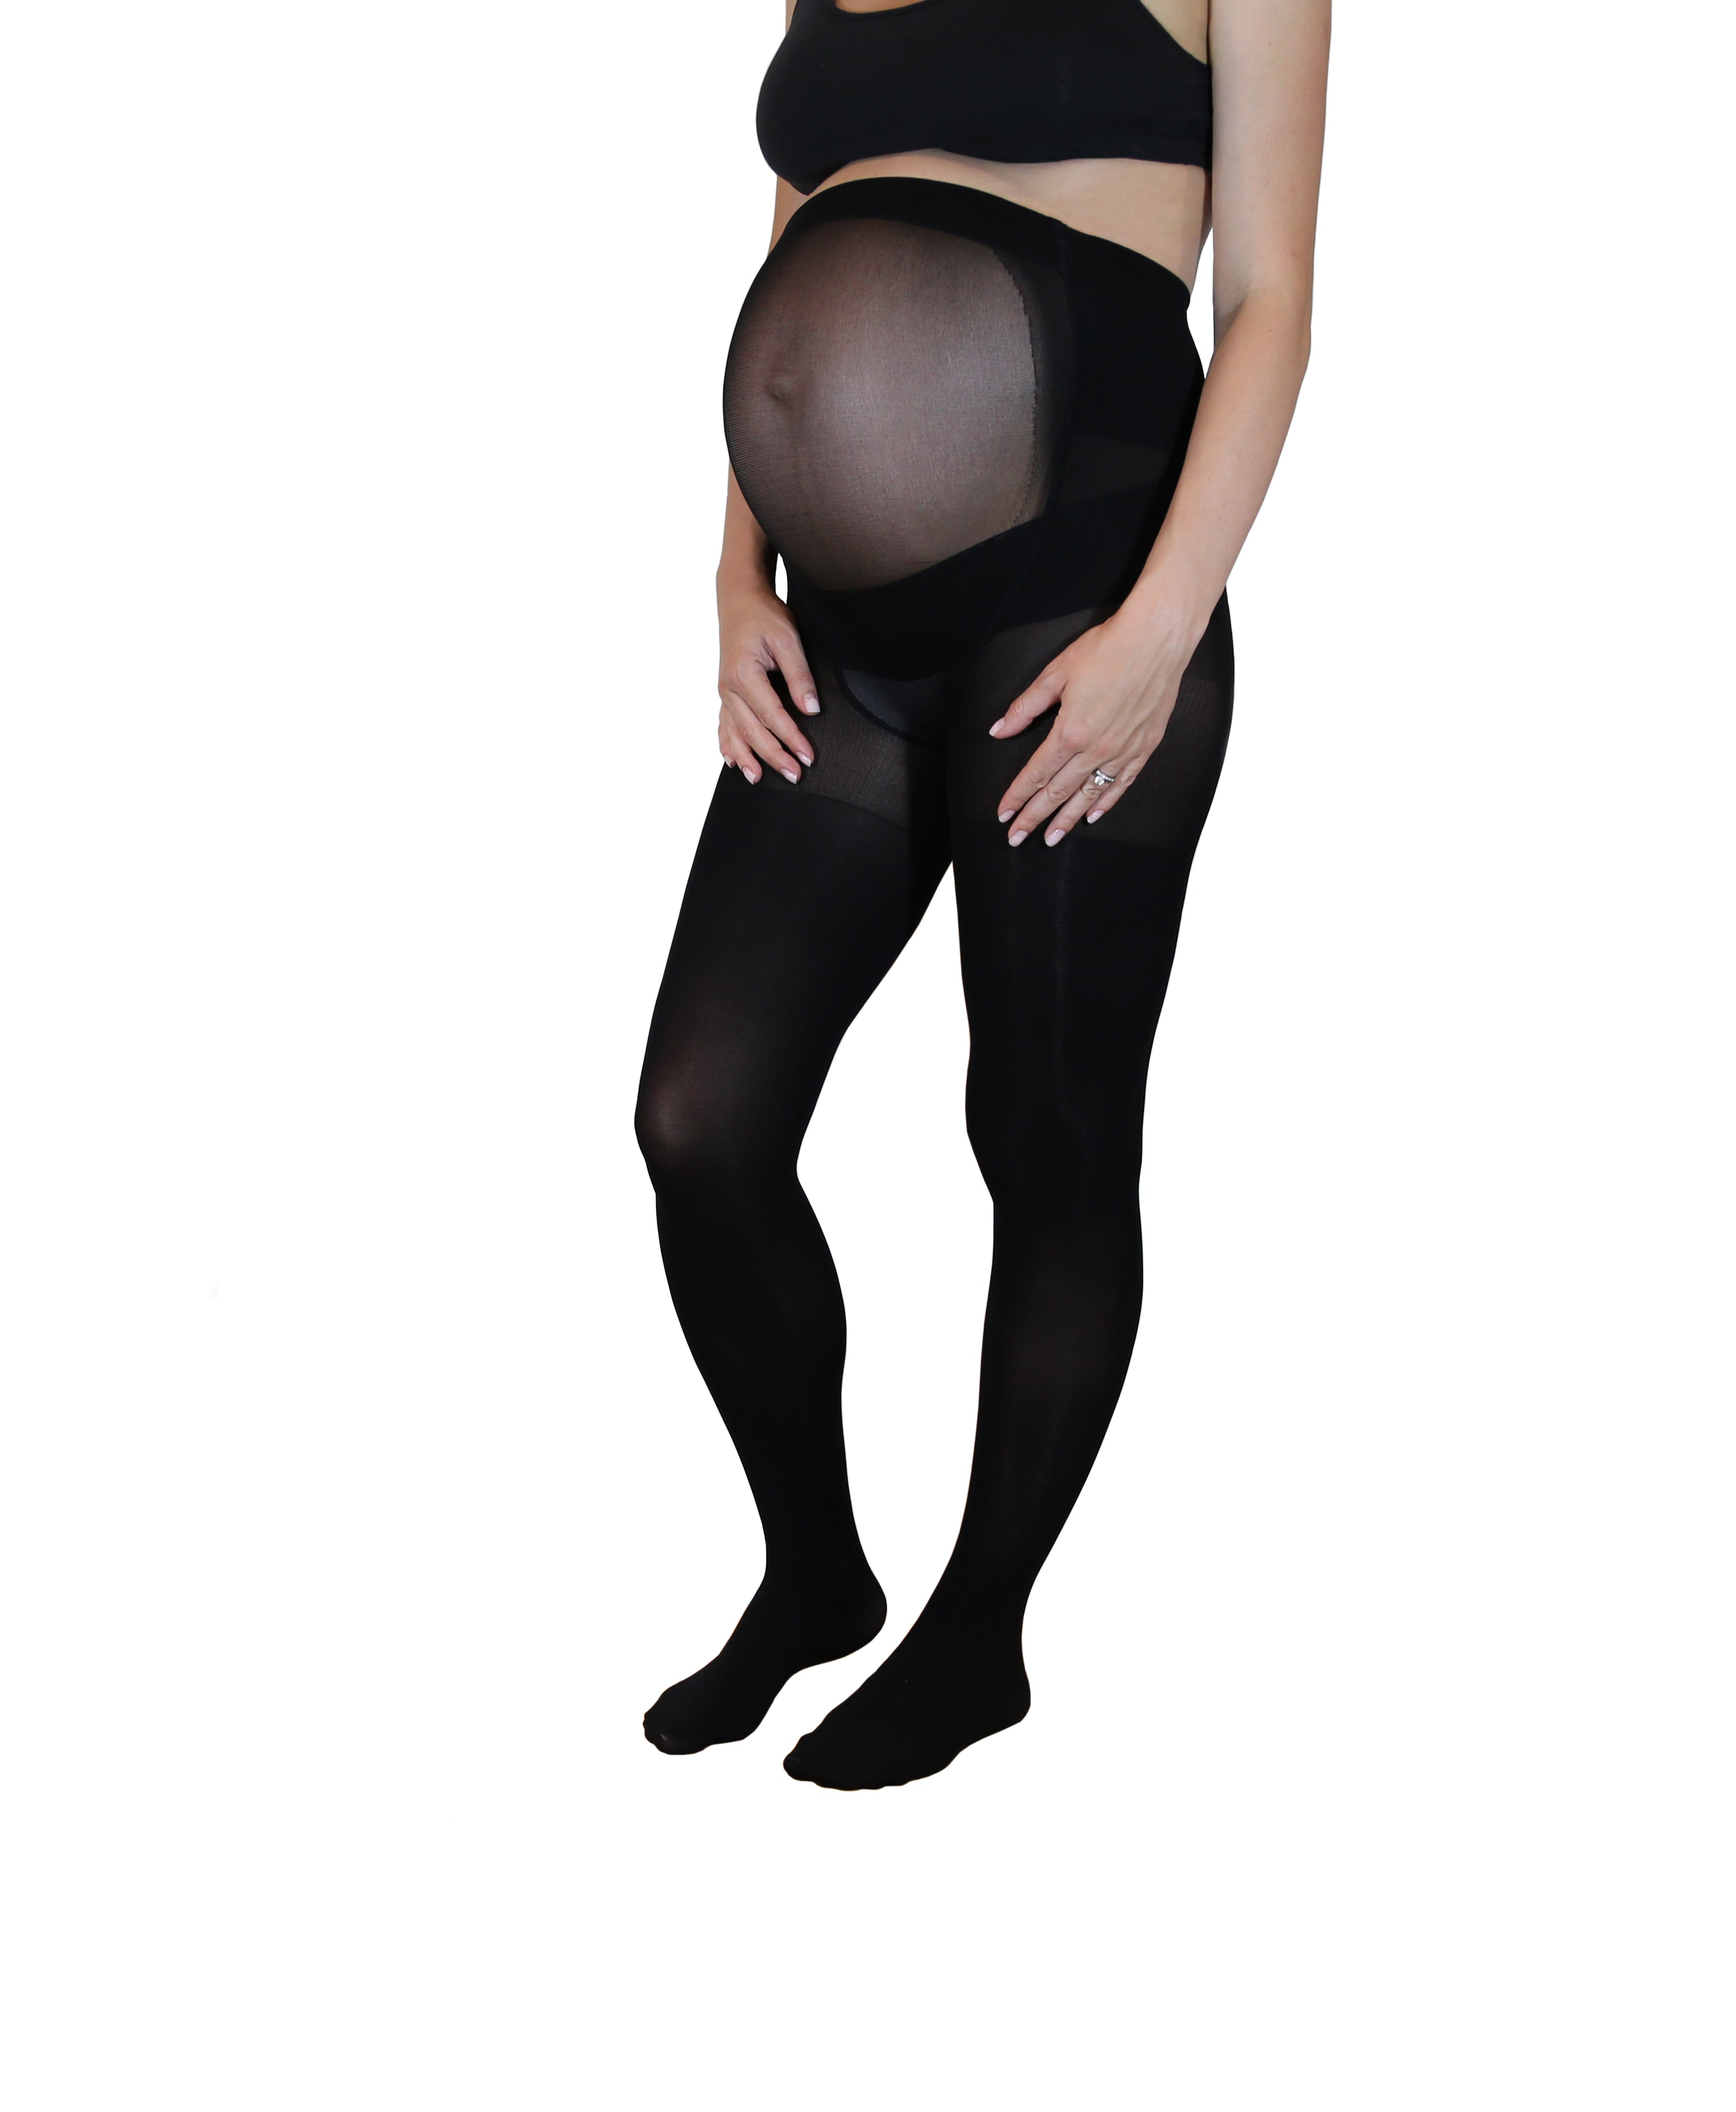 Pack of 2 pairs of opaque Maternity tights - black